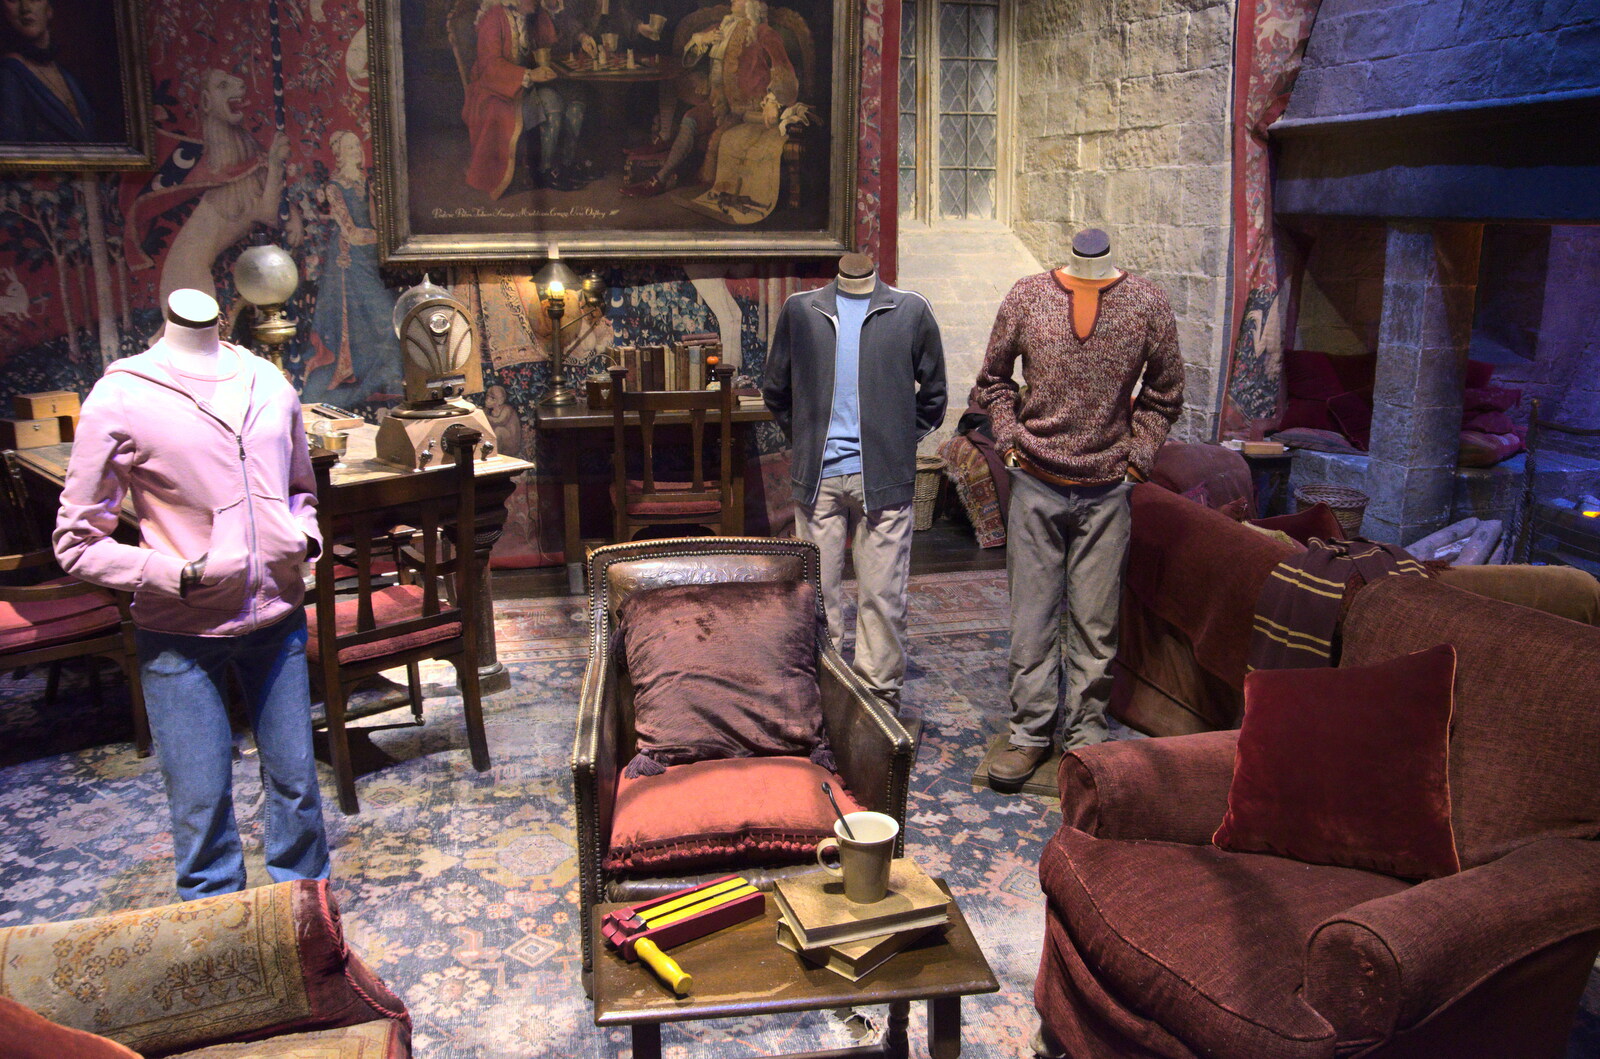 The common room from A Trip to Harry Potter World, Leavesden, Hertfordshire - 16th February 2020